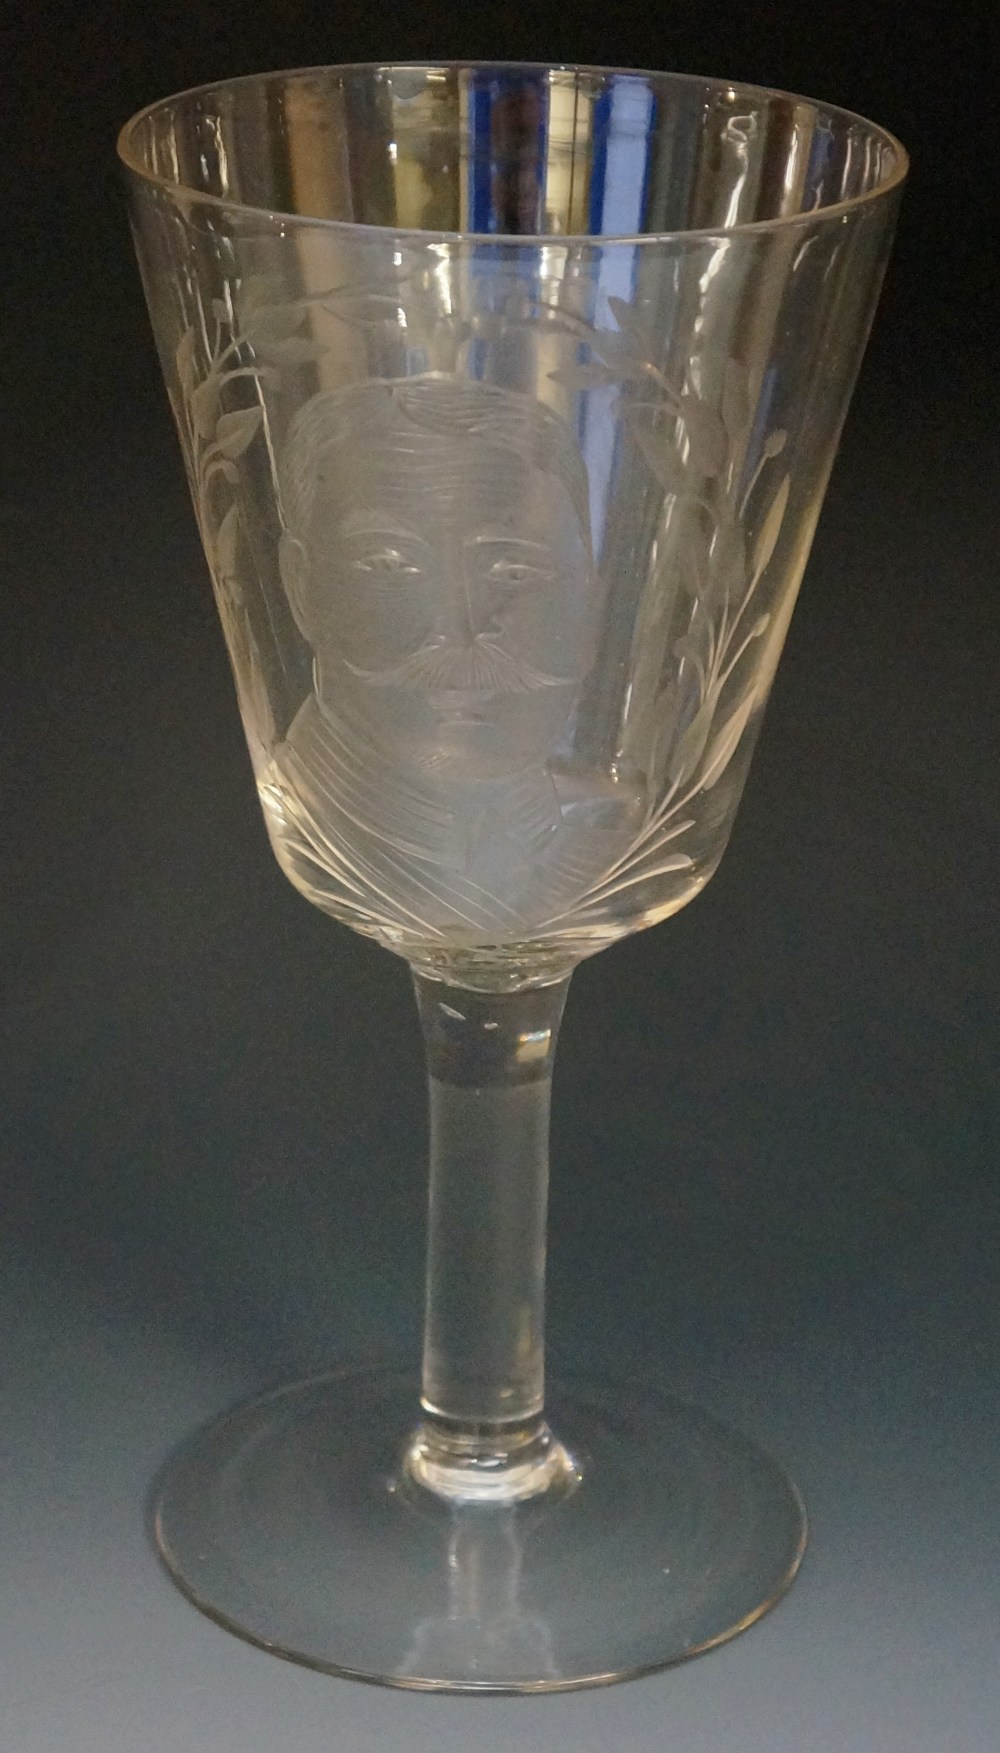 A glass goblet commemorating the appointment of General Haig as the head of the British